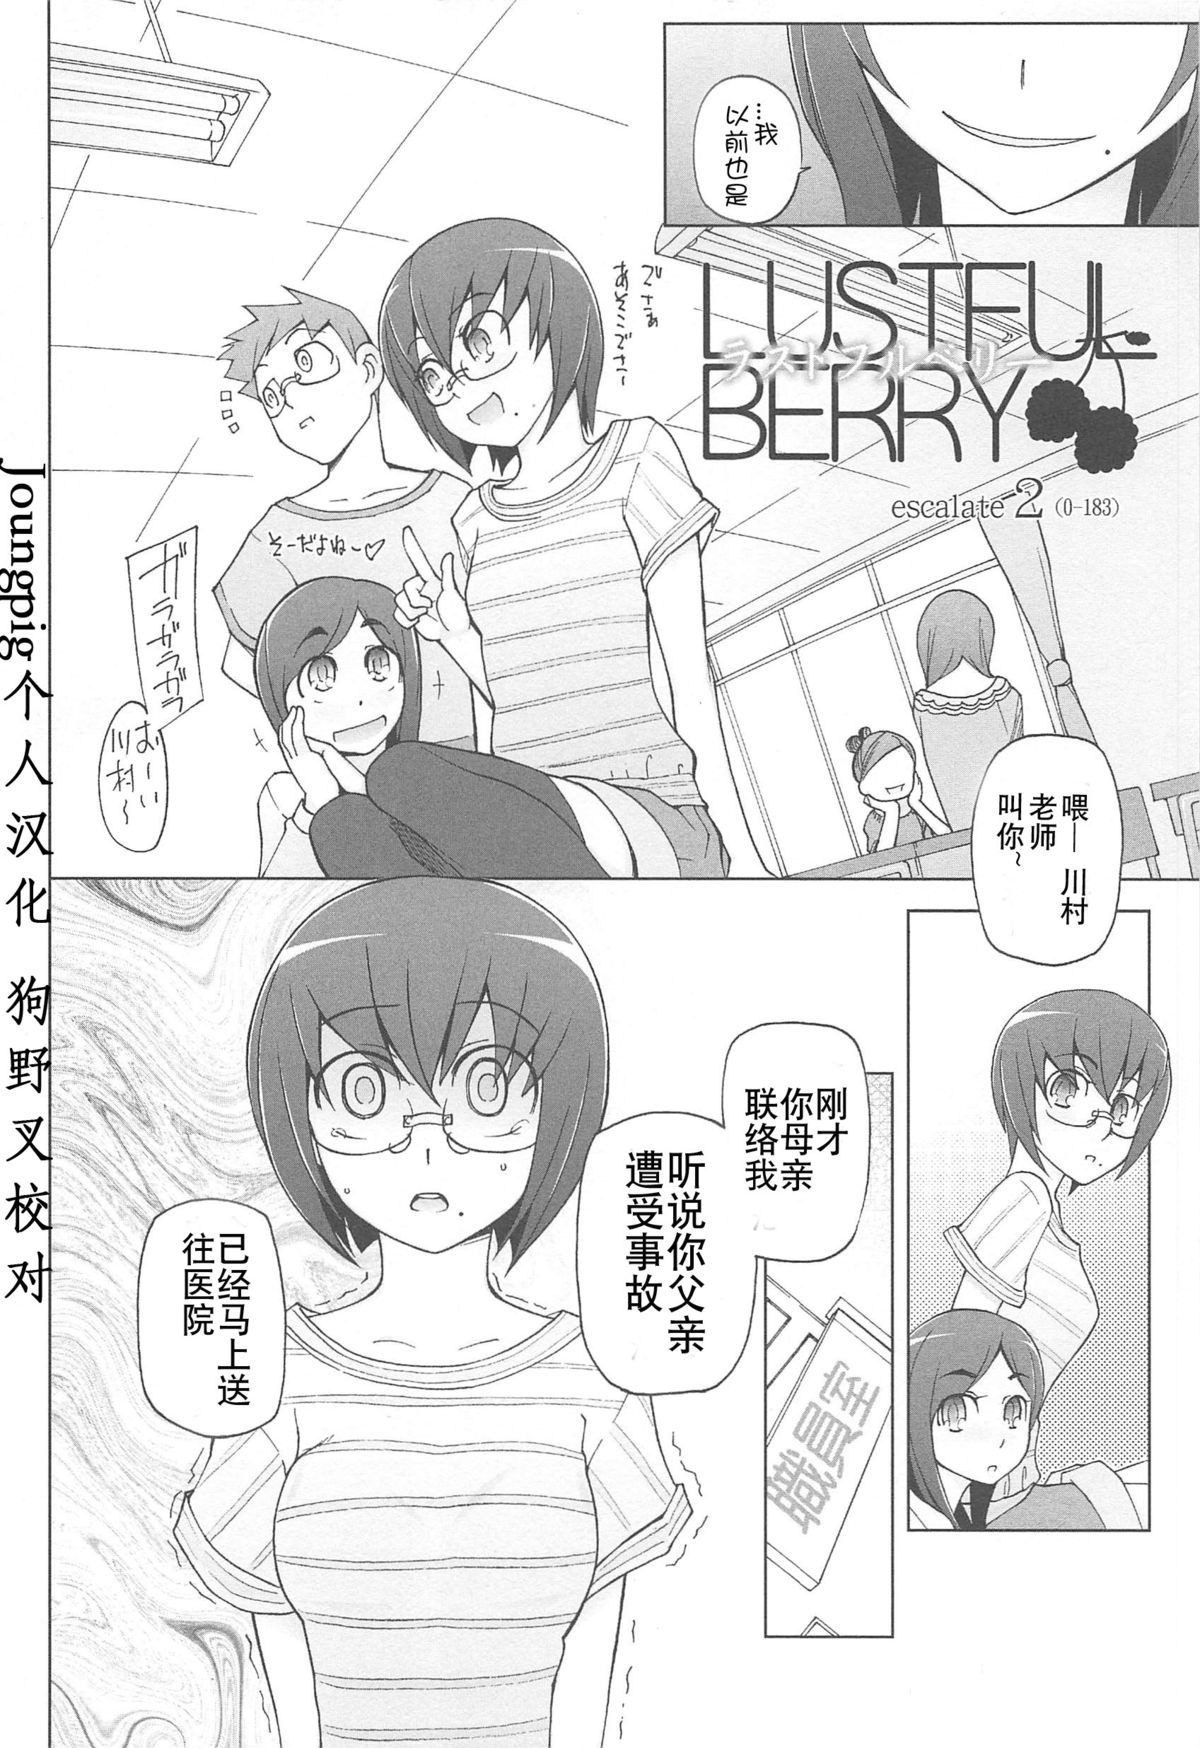 [Miito Shido] LUSTFUL BERRY Ch. 2 [Chinese] [joungpig个人汉化] page 2 full